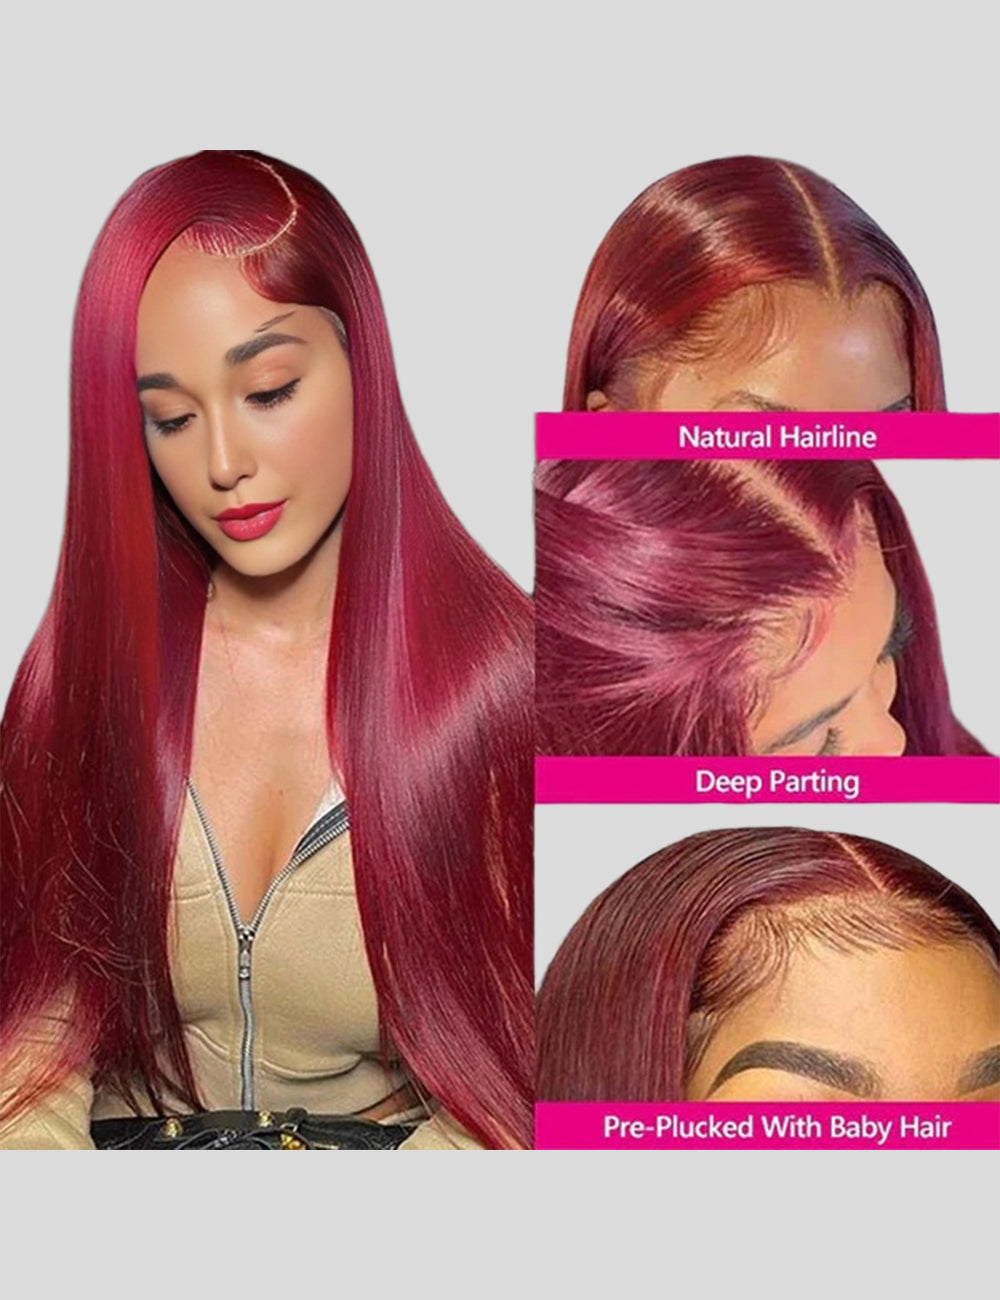 Burgundy Lace Front Wigs 32 Inch HD Human Hair Wigs Straight Colored Wigs with Baby Hair